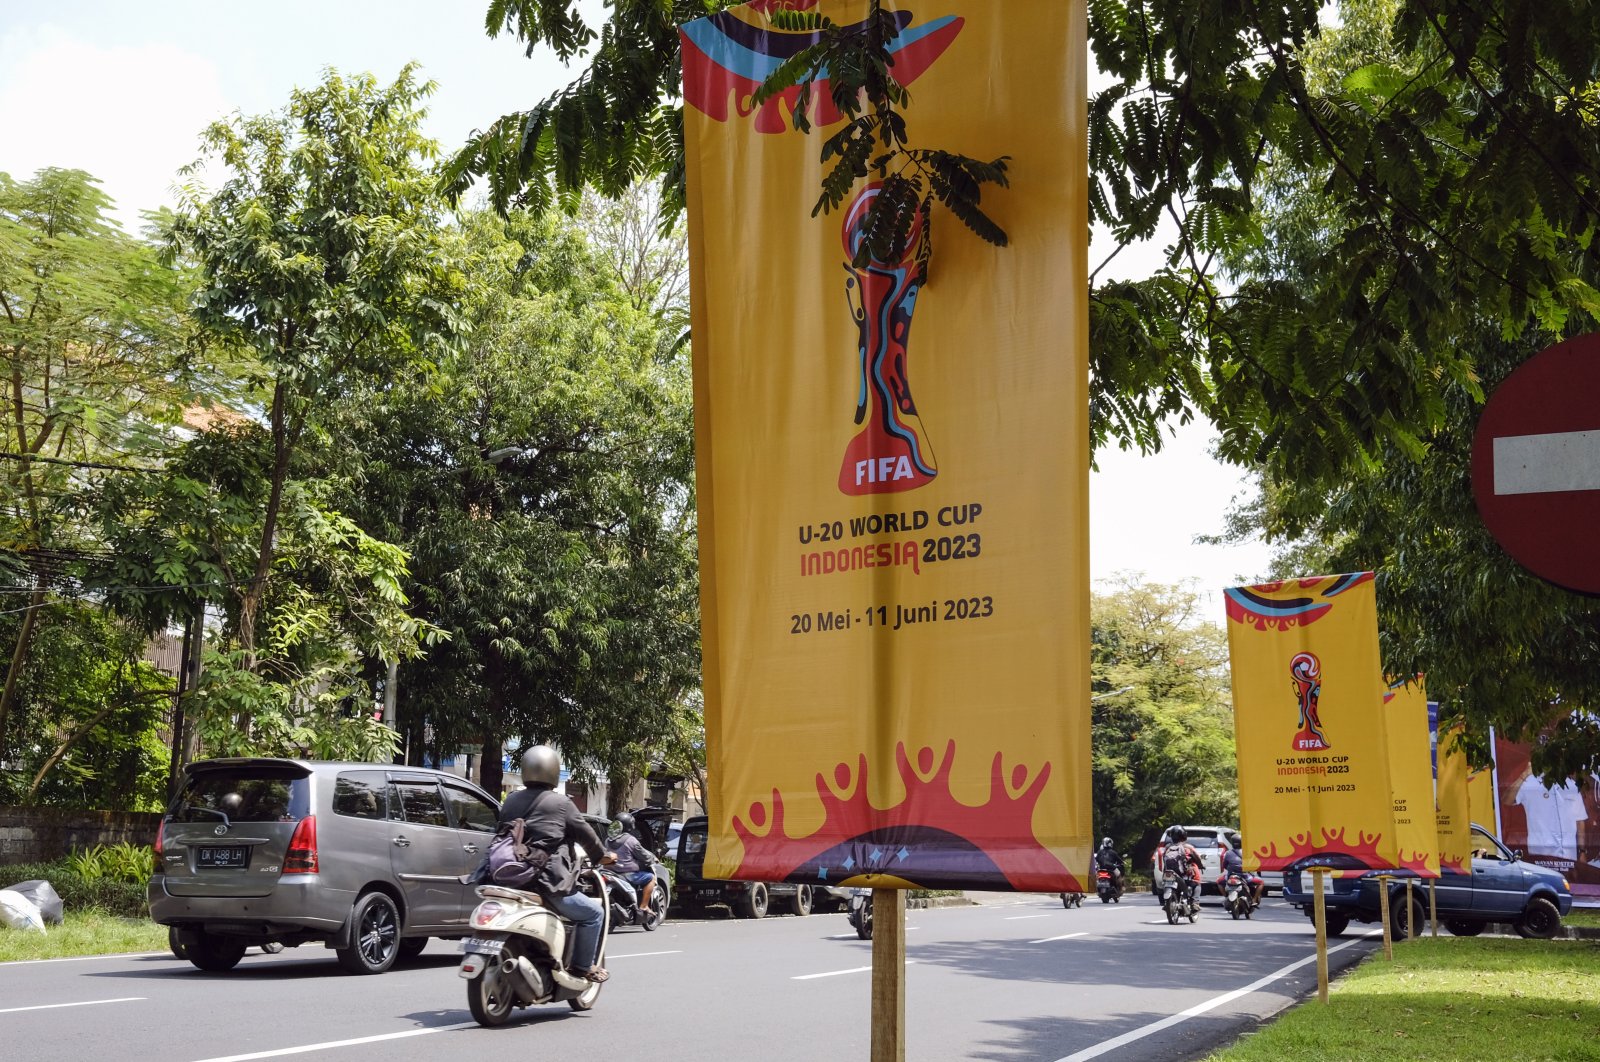 People drive past the banners of FIFA U-20 World Cup 2023 at a main road, Denpasar, Bali, Indonesia, March 27, 2023. (EPA Photo)